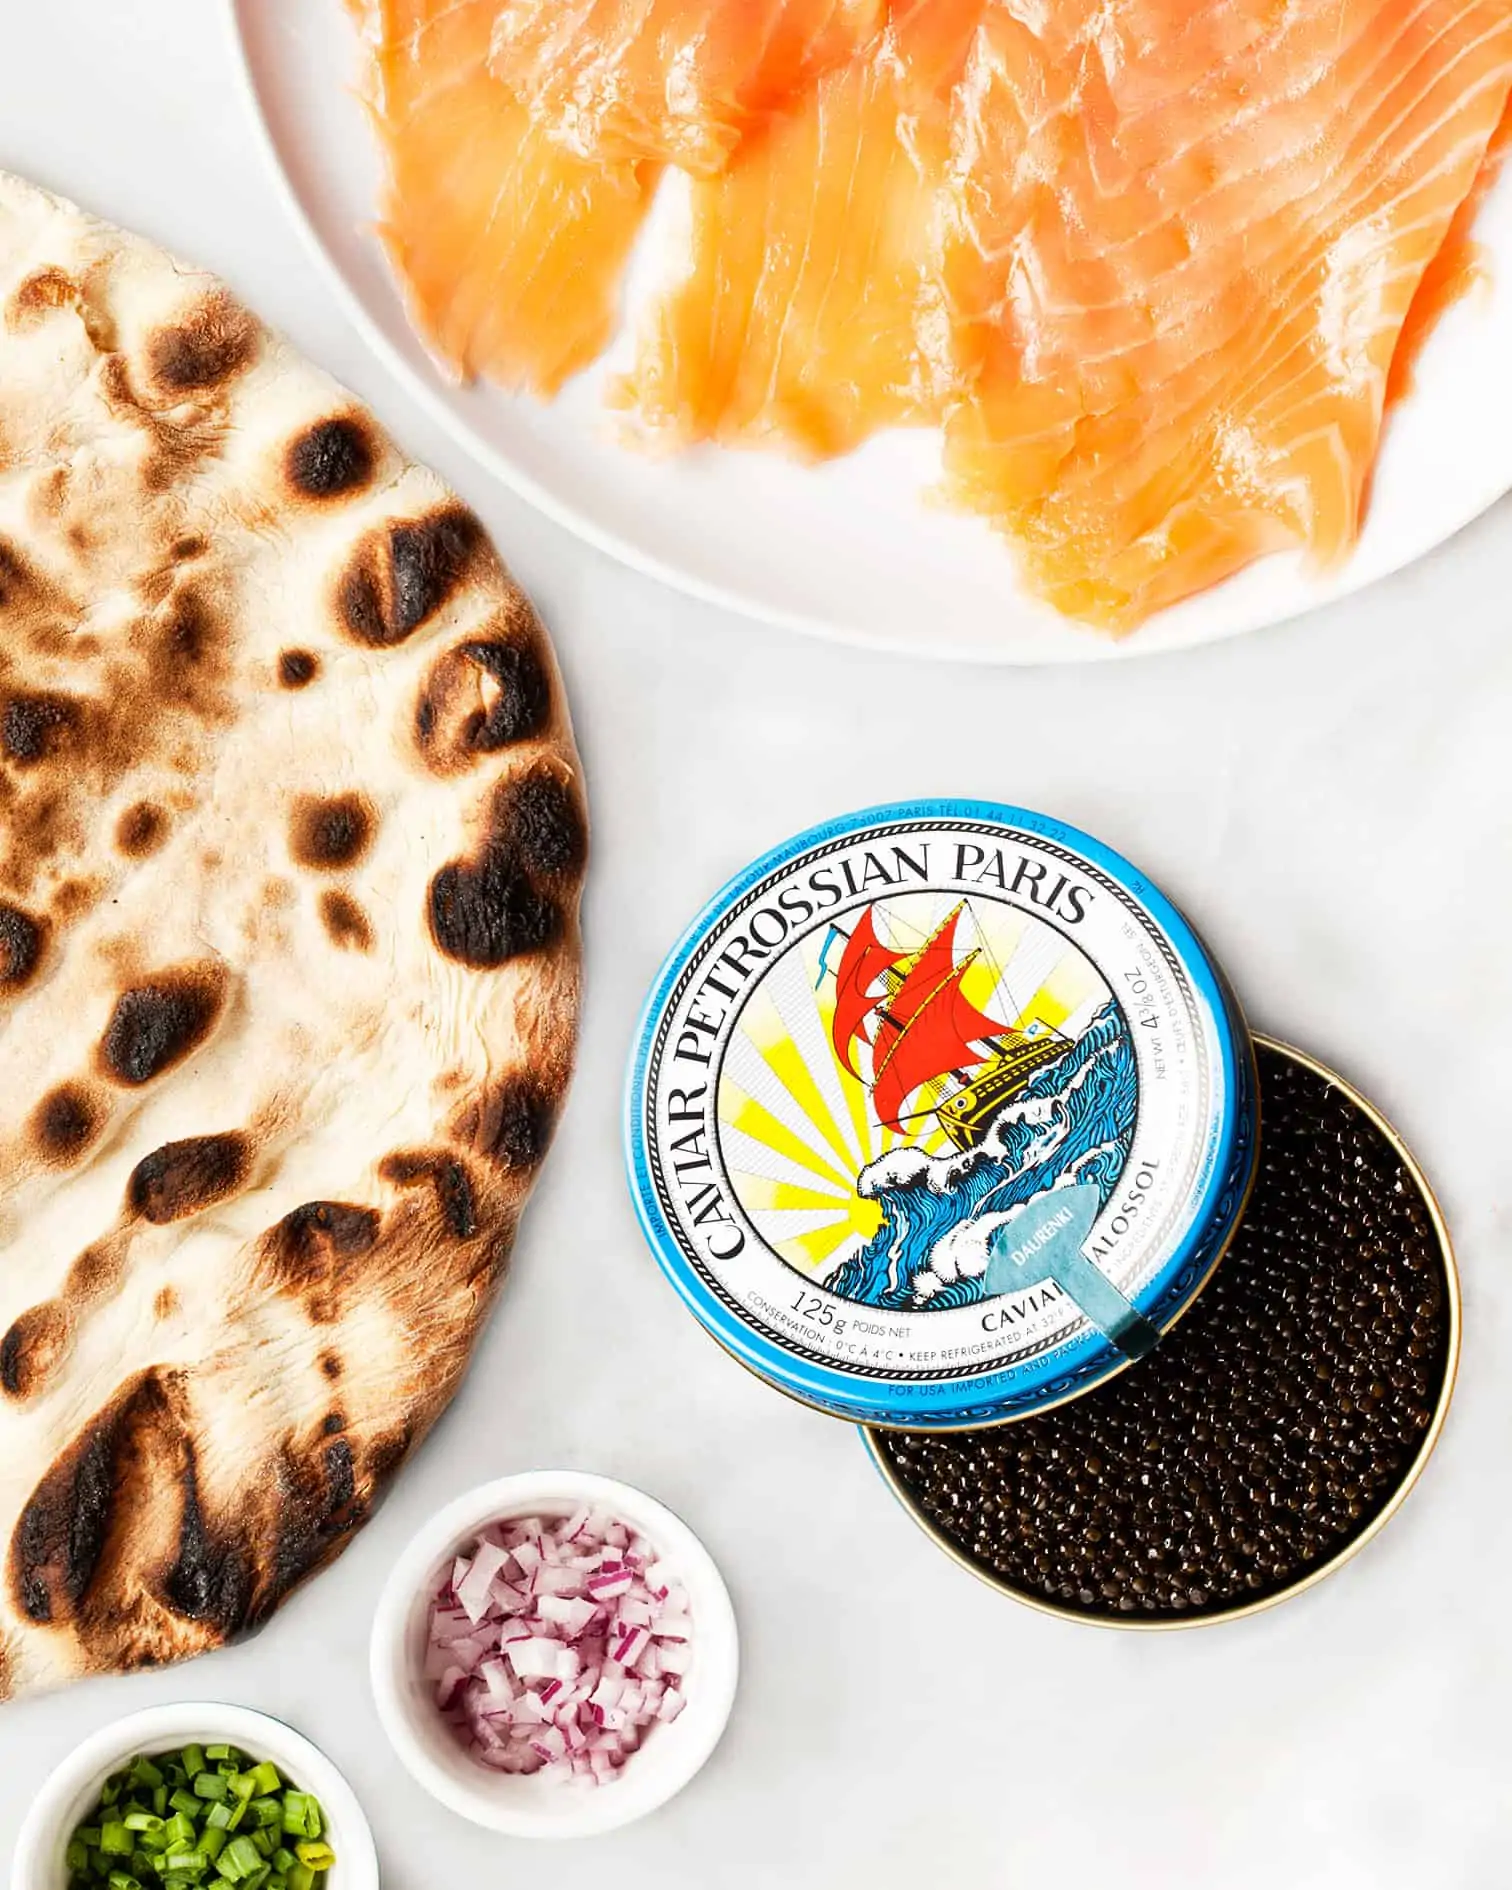 Grilled Pizza with Caviar and Smoked Salmon